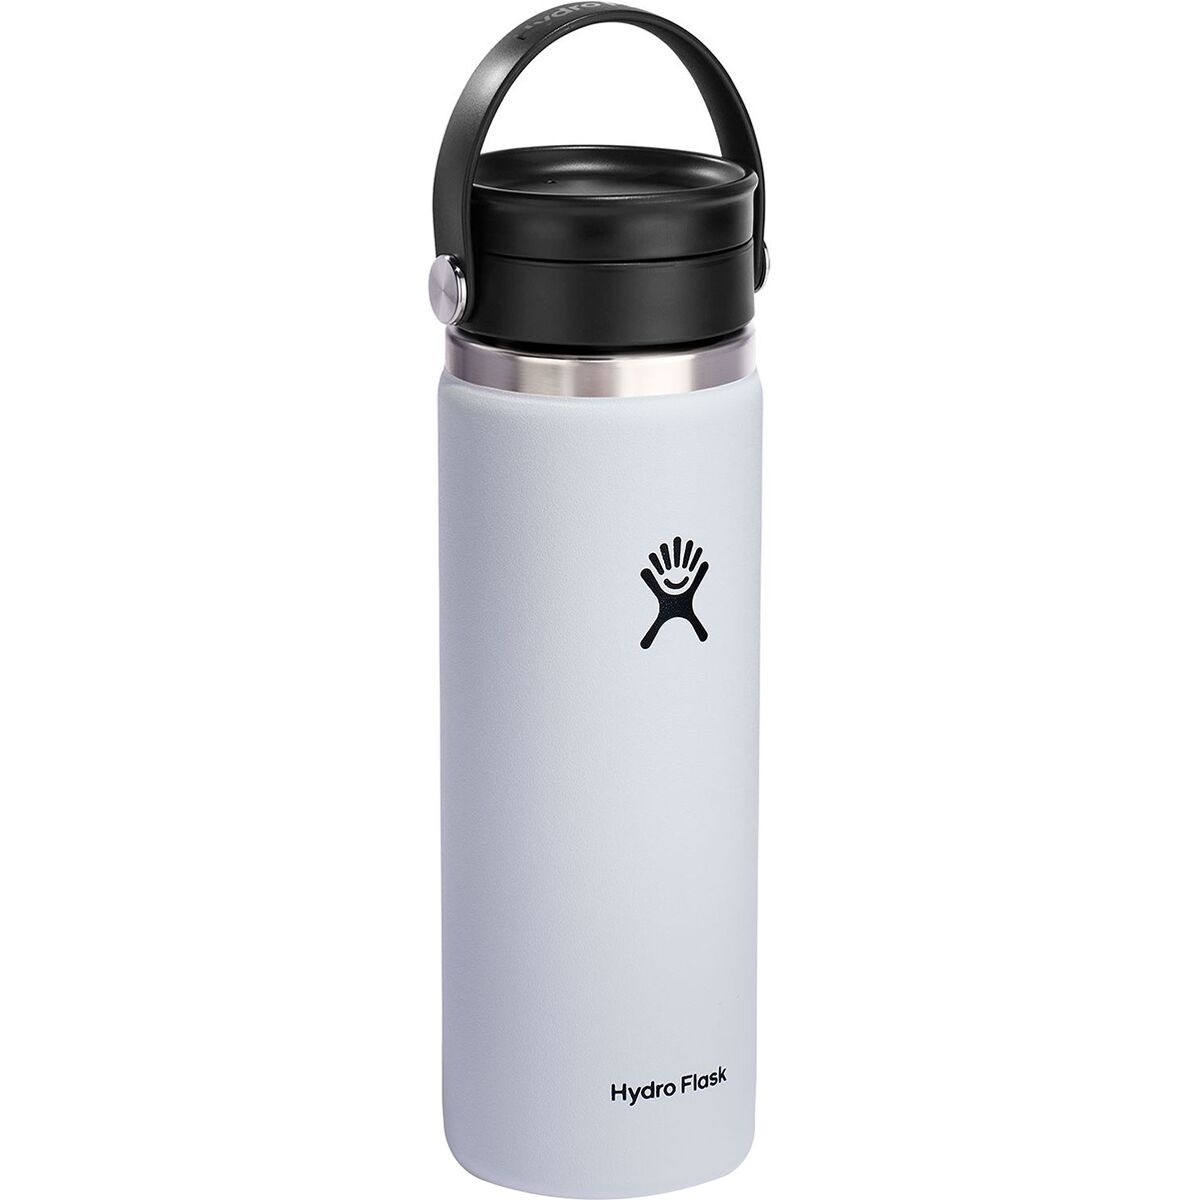 Hydro Flask has come out with 'THE' coffee cup you need – Adventure 52